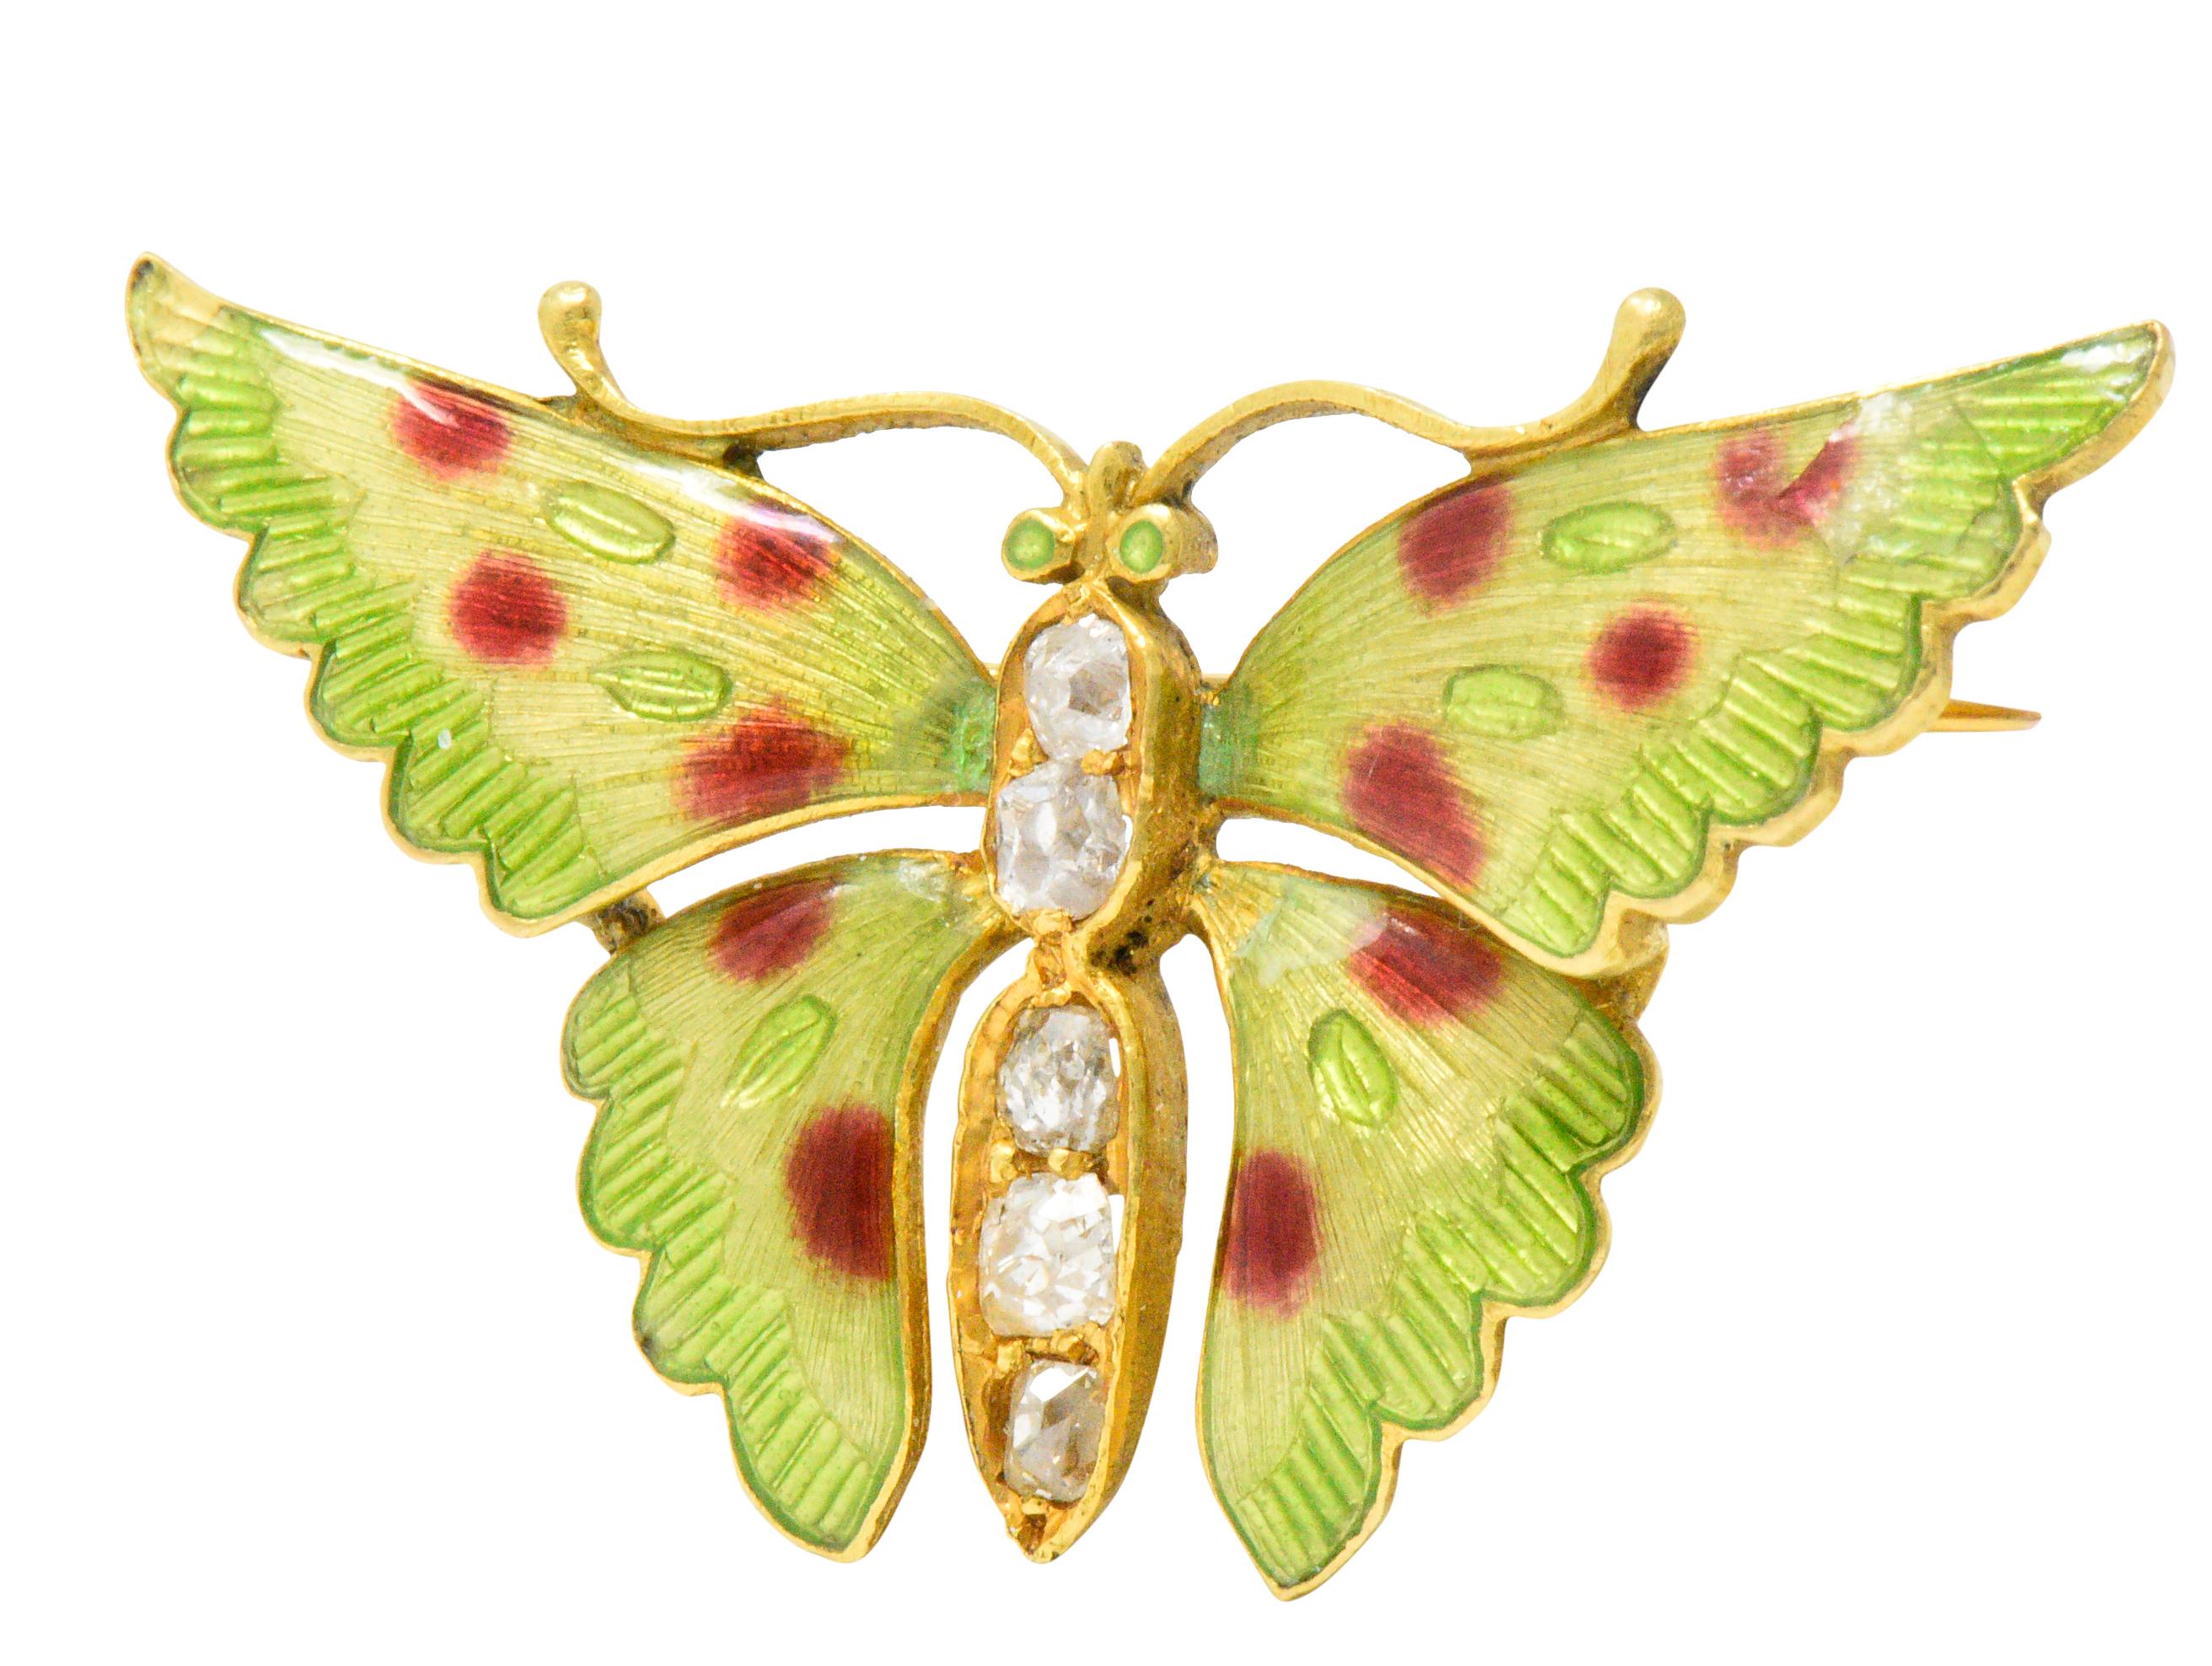 Butterfly whose body is accented with old mine cut diamonds weighing approximately 0.60 carats total, near eye-clean and white

Exquisite enameling in green, yellow and red adorn the wings and eyes

Tested as 14 karat gold

A nature lover's